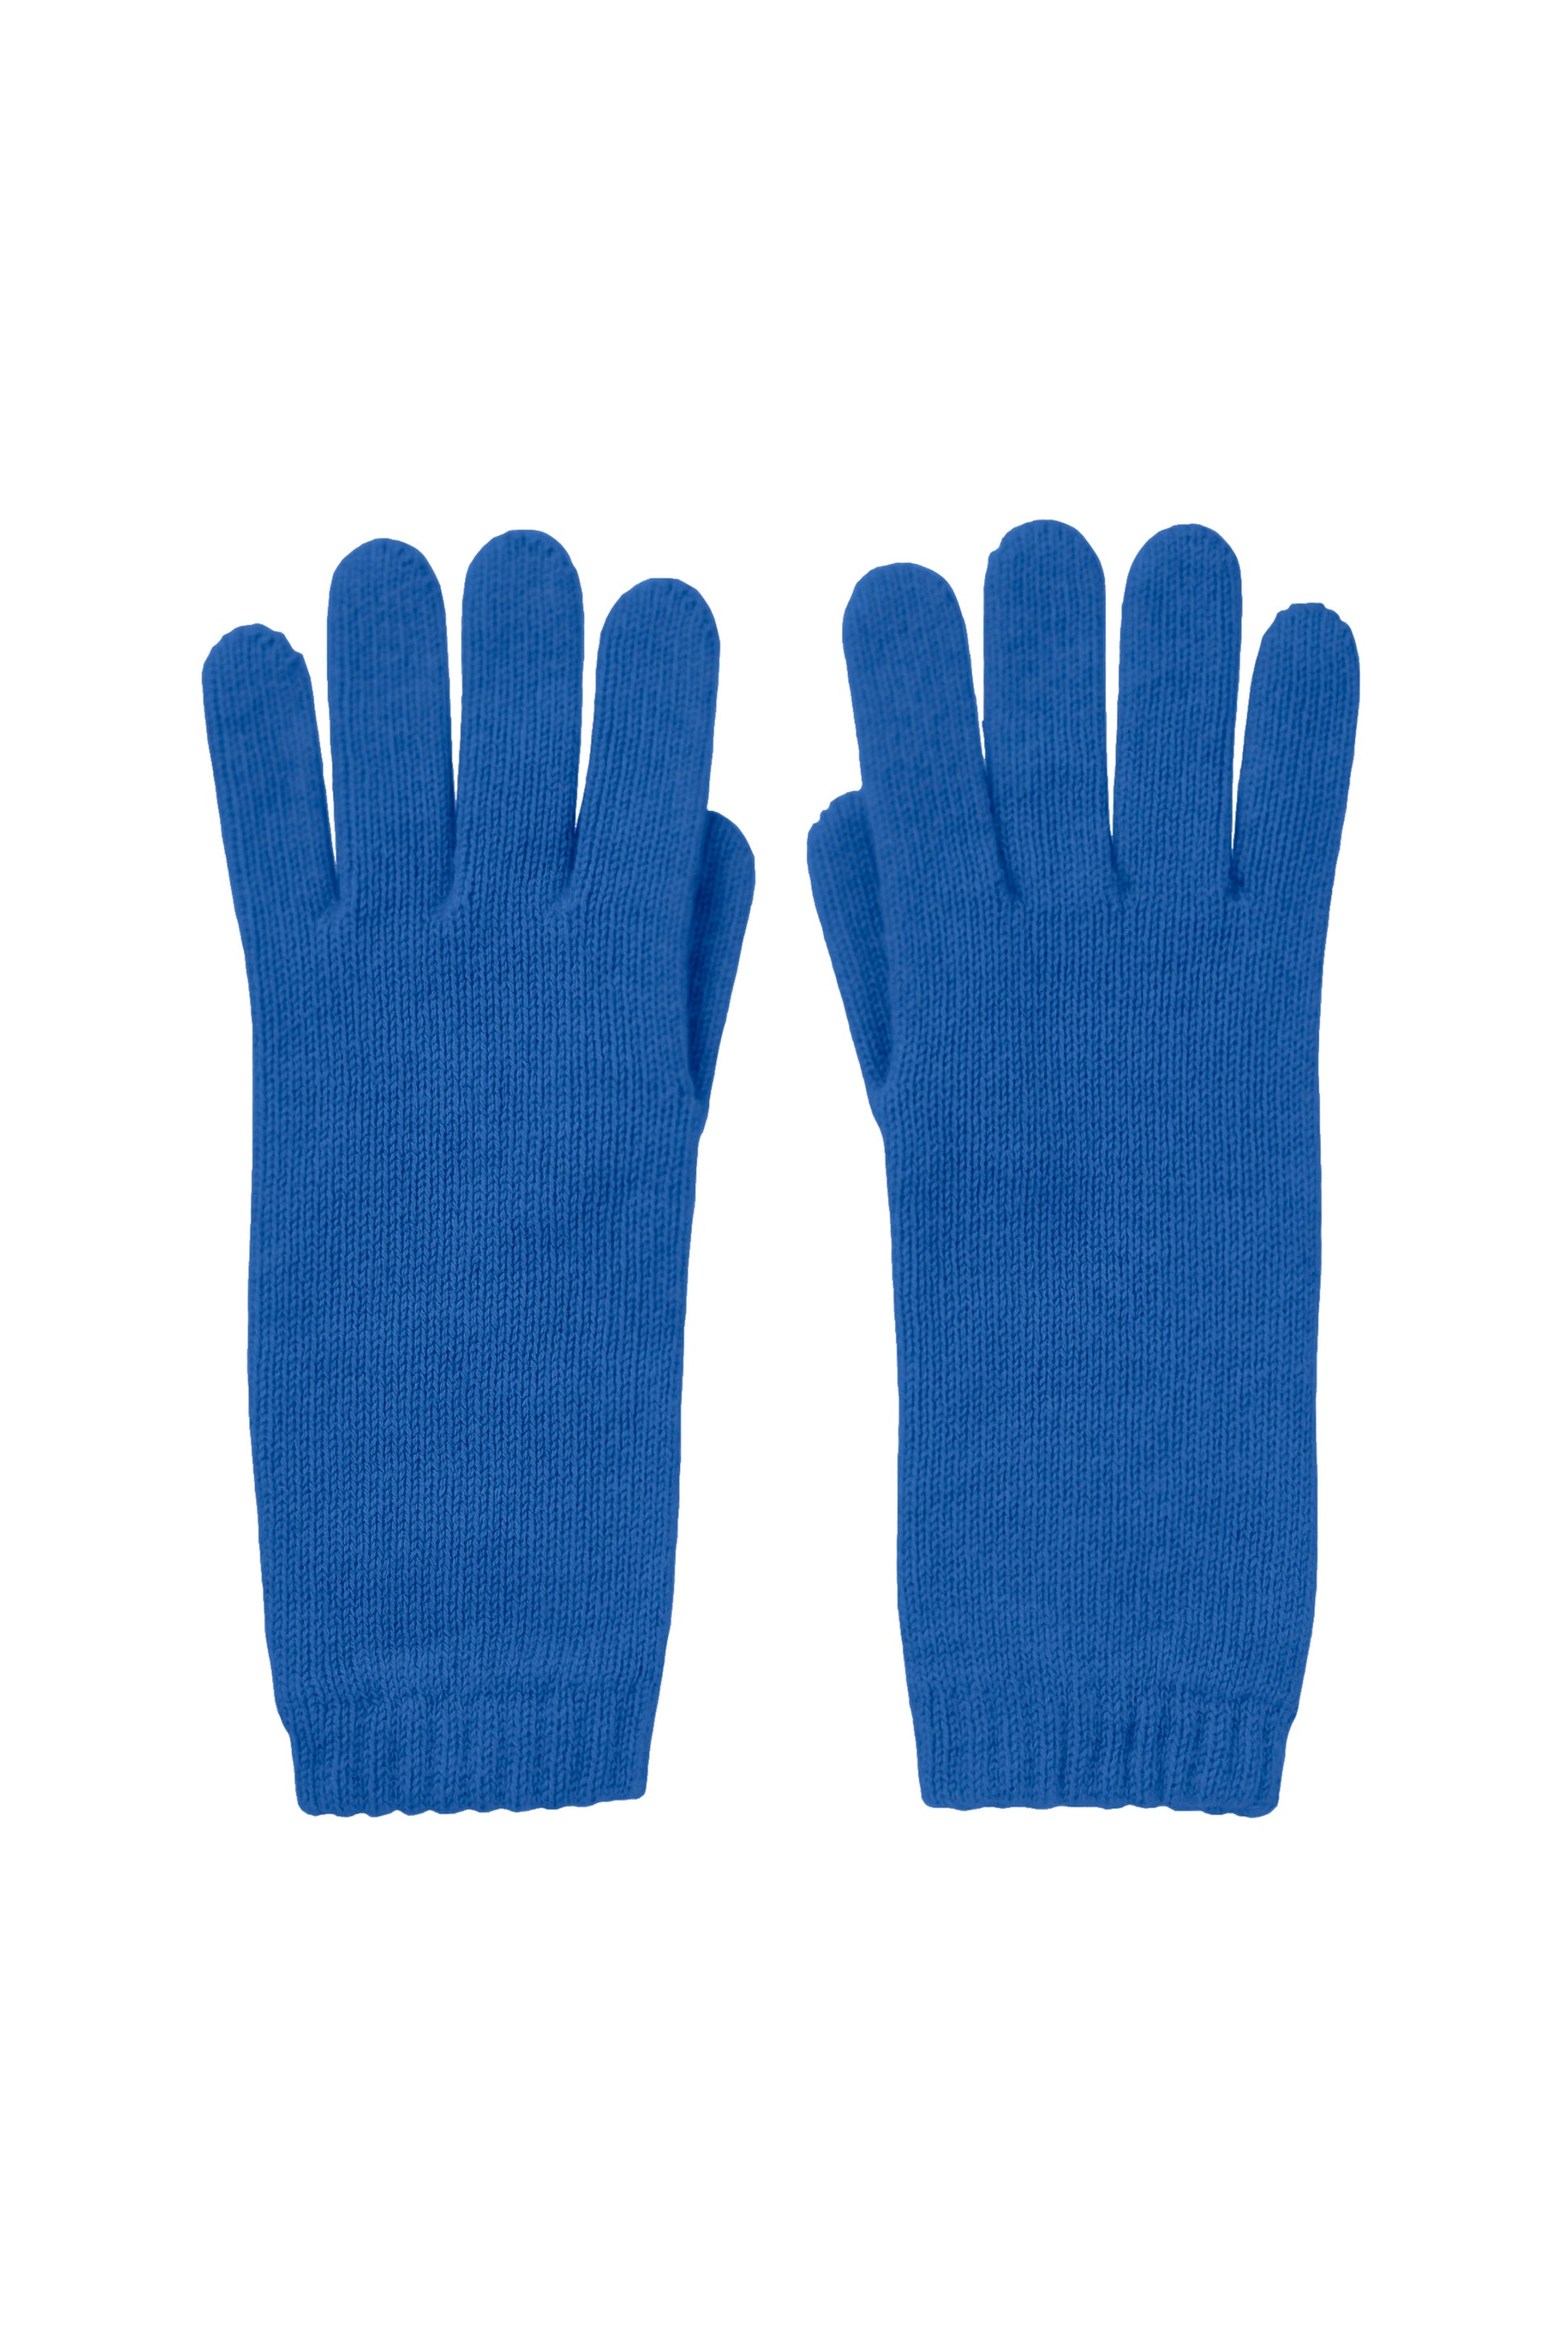 Johnstons of Elgin AW24 Knitted Accessory Orkney Blue Women's Cashmere Gloves HAD03226SD4991ONE